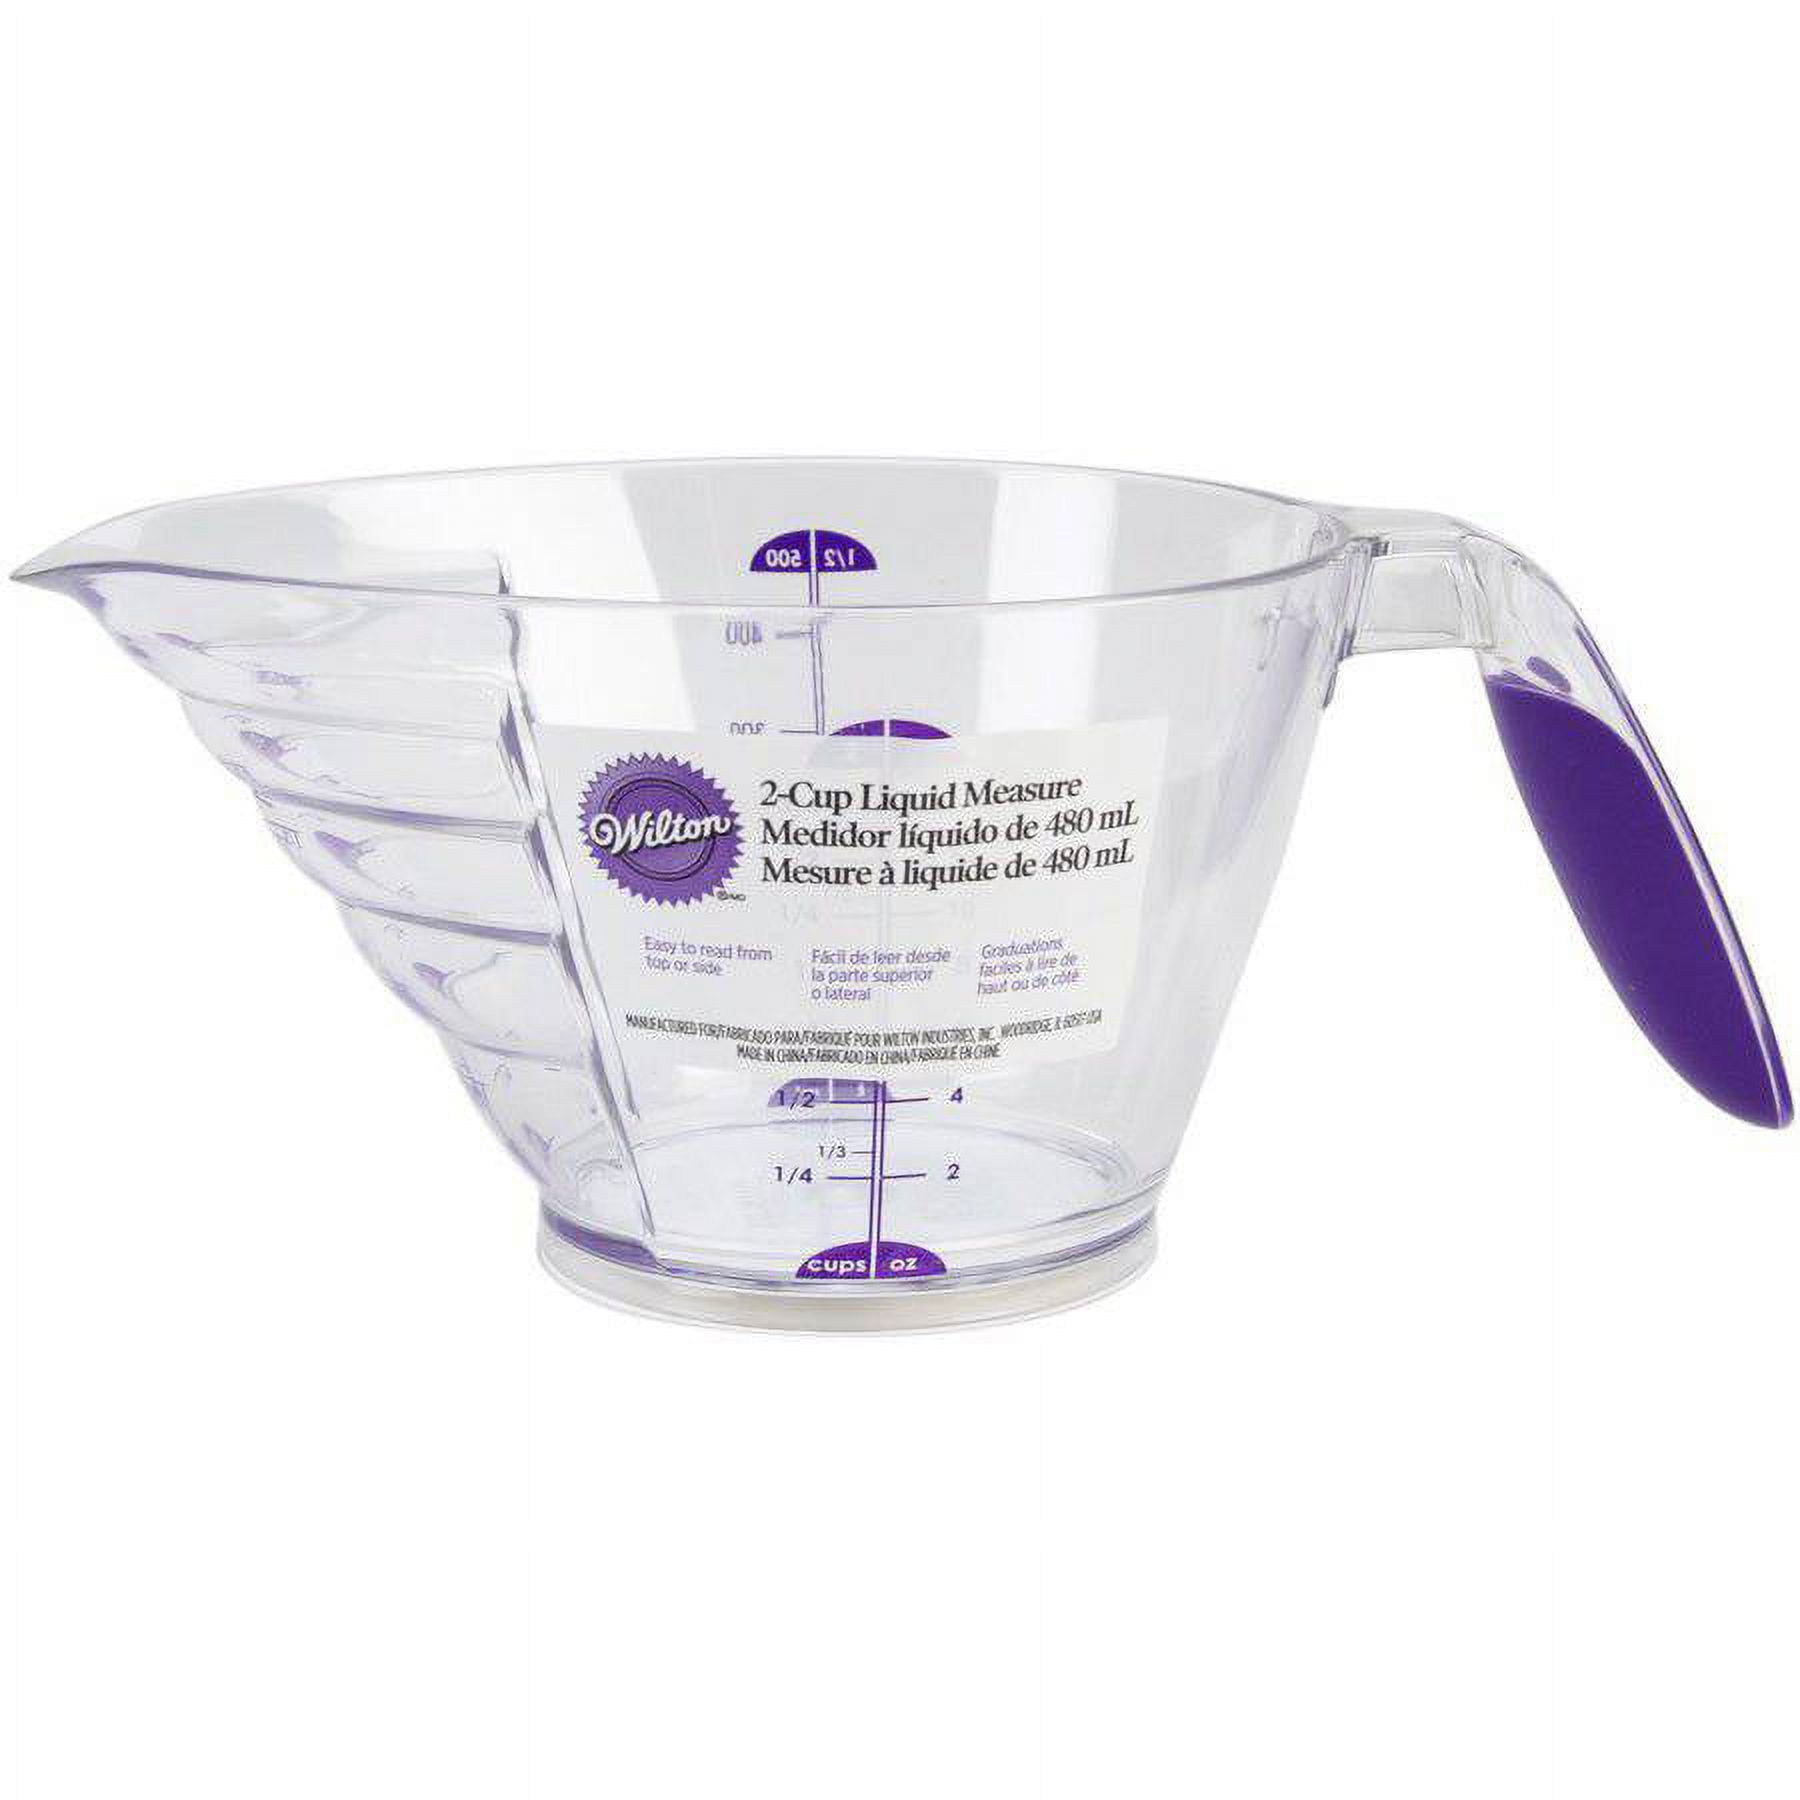 Set of 4 Glass Measuring Cups - Kitchen Mixing Bowl Liquid Measure Cup,  Glass Tupperware Bakeware. 1 cup, 2 cup, 4 cup, 8 cup.